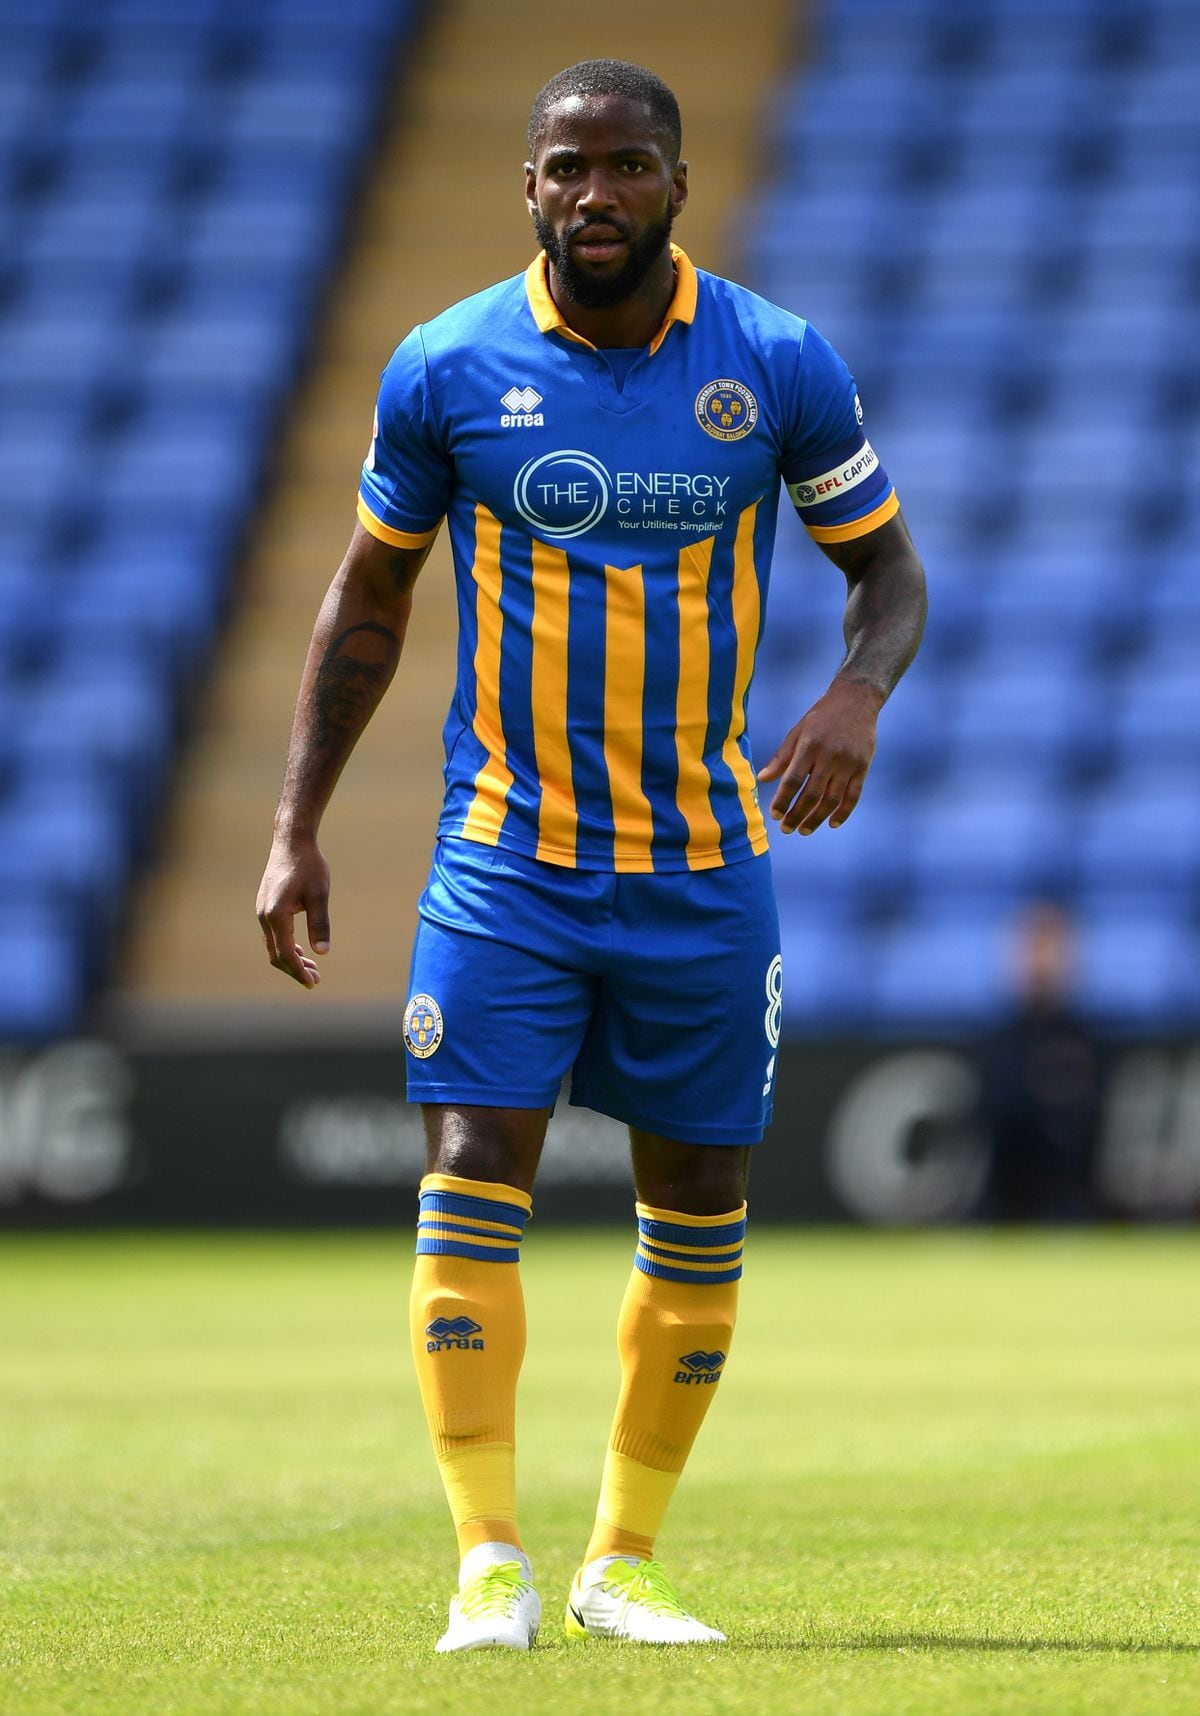  Agu  Ogogo looking to lead by example for Shrewsbury Town 